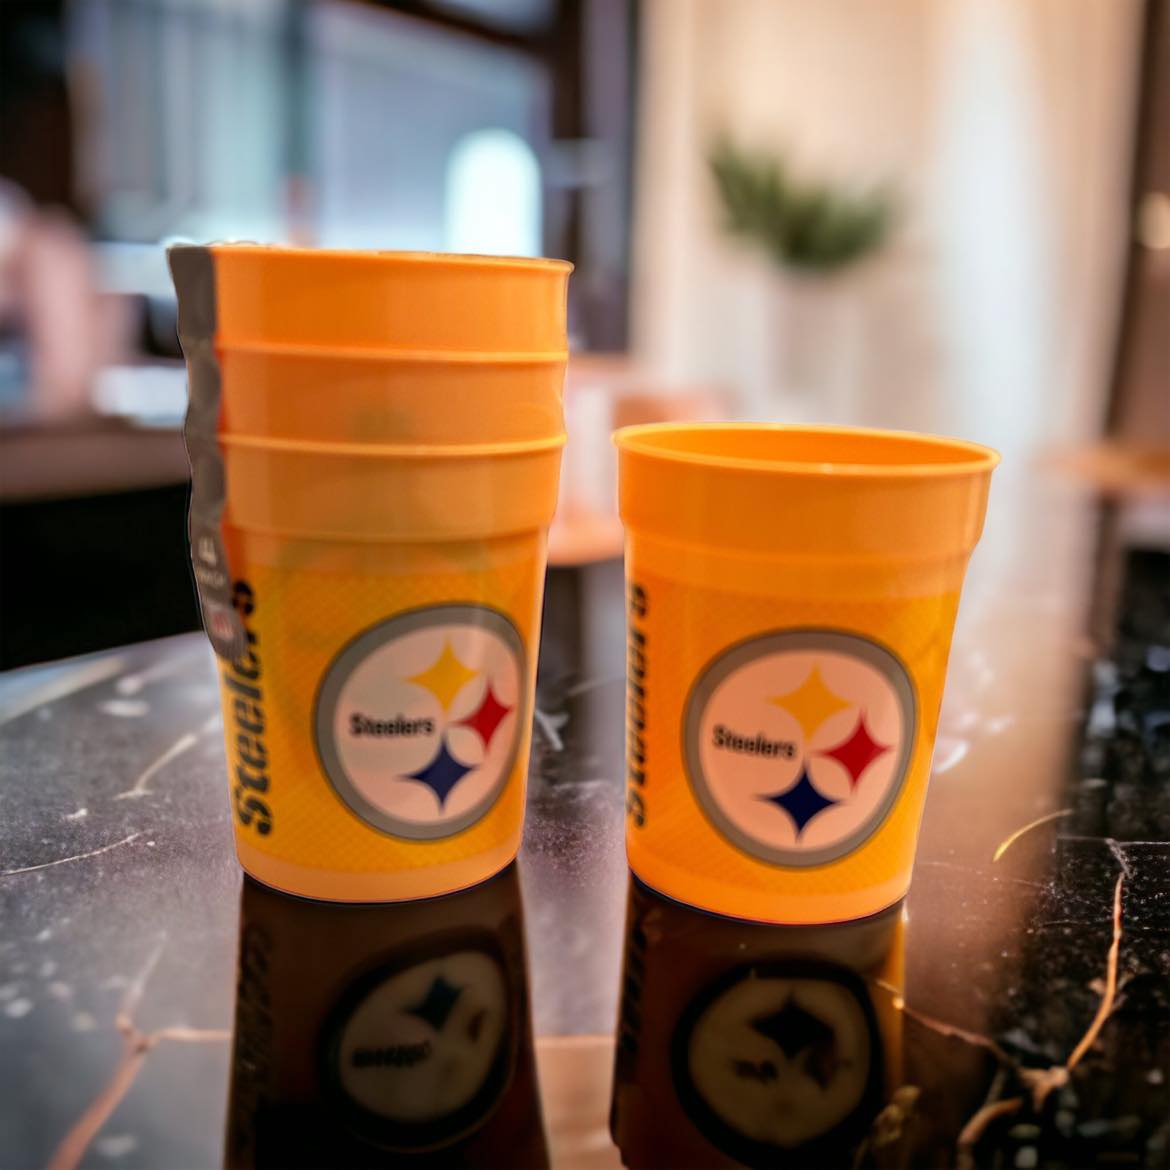 Pittsburgh Steelers Favor Cup